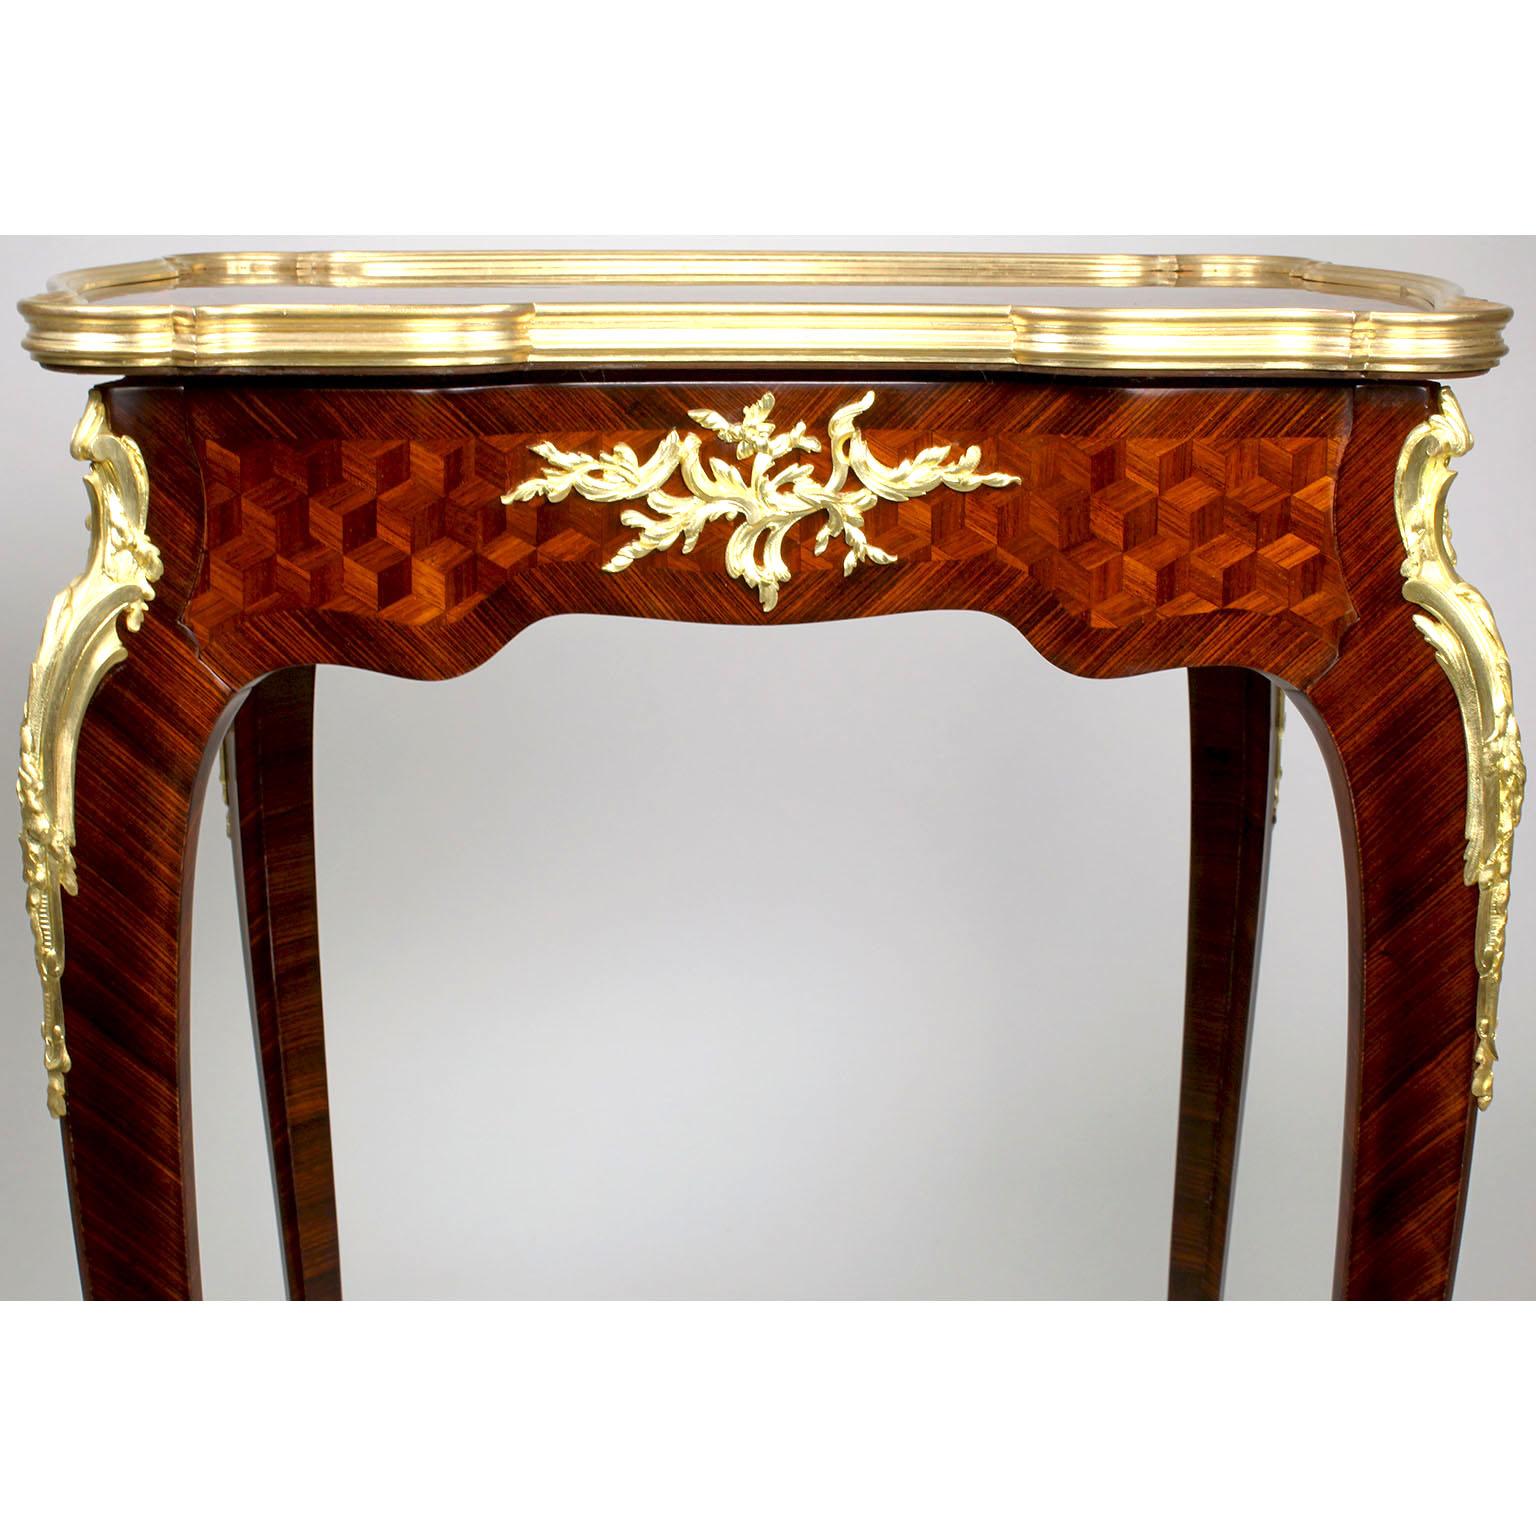 Fine French Louis XV Style Ormolu Mounted Marquetry Side-Table by François Linke For Sale 9